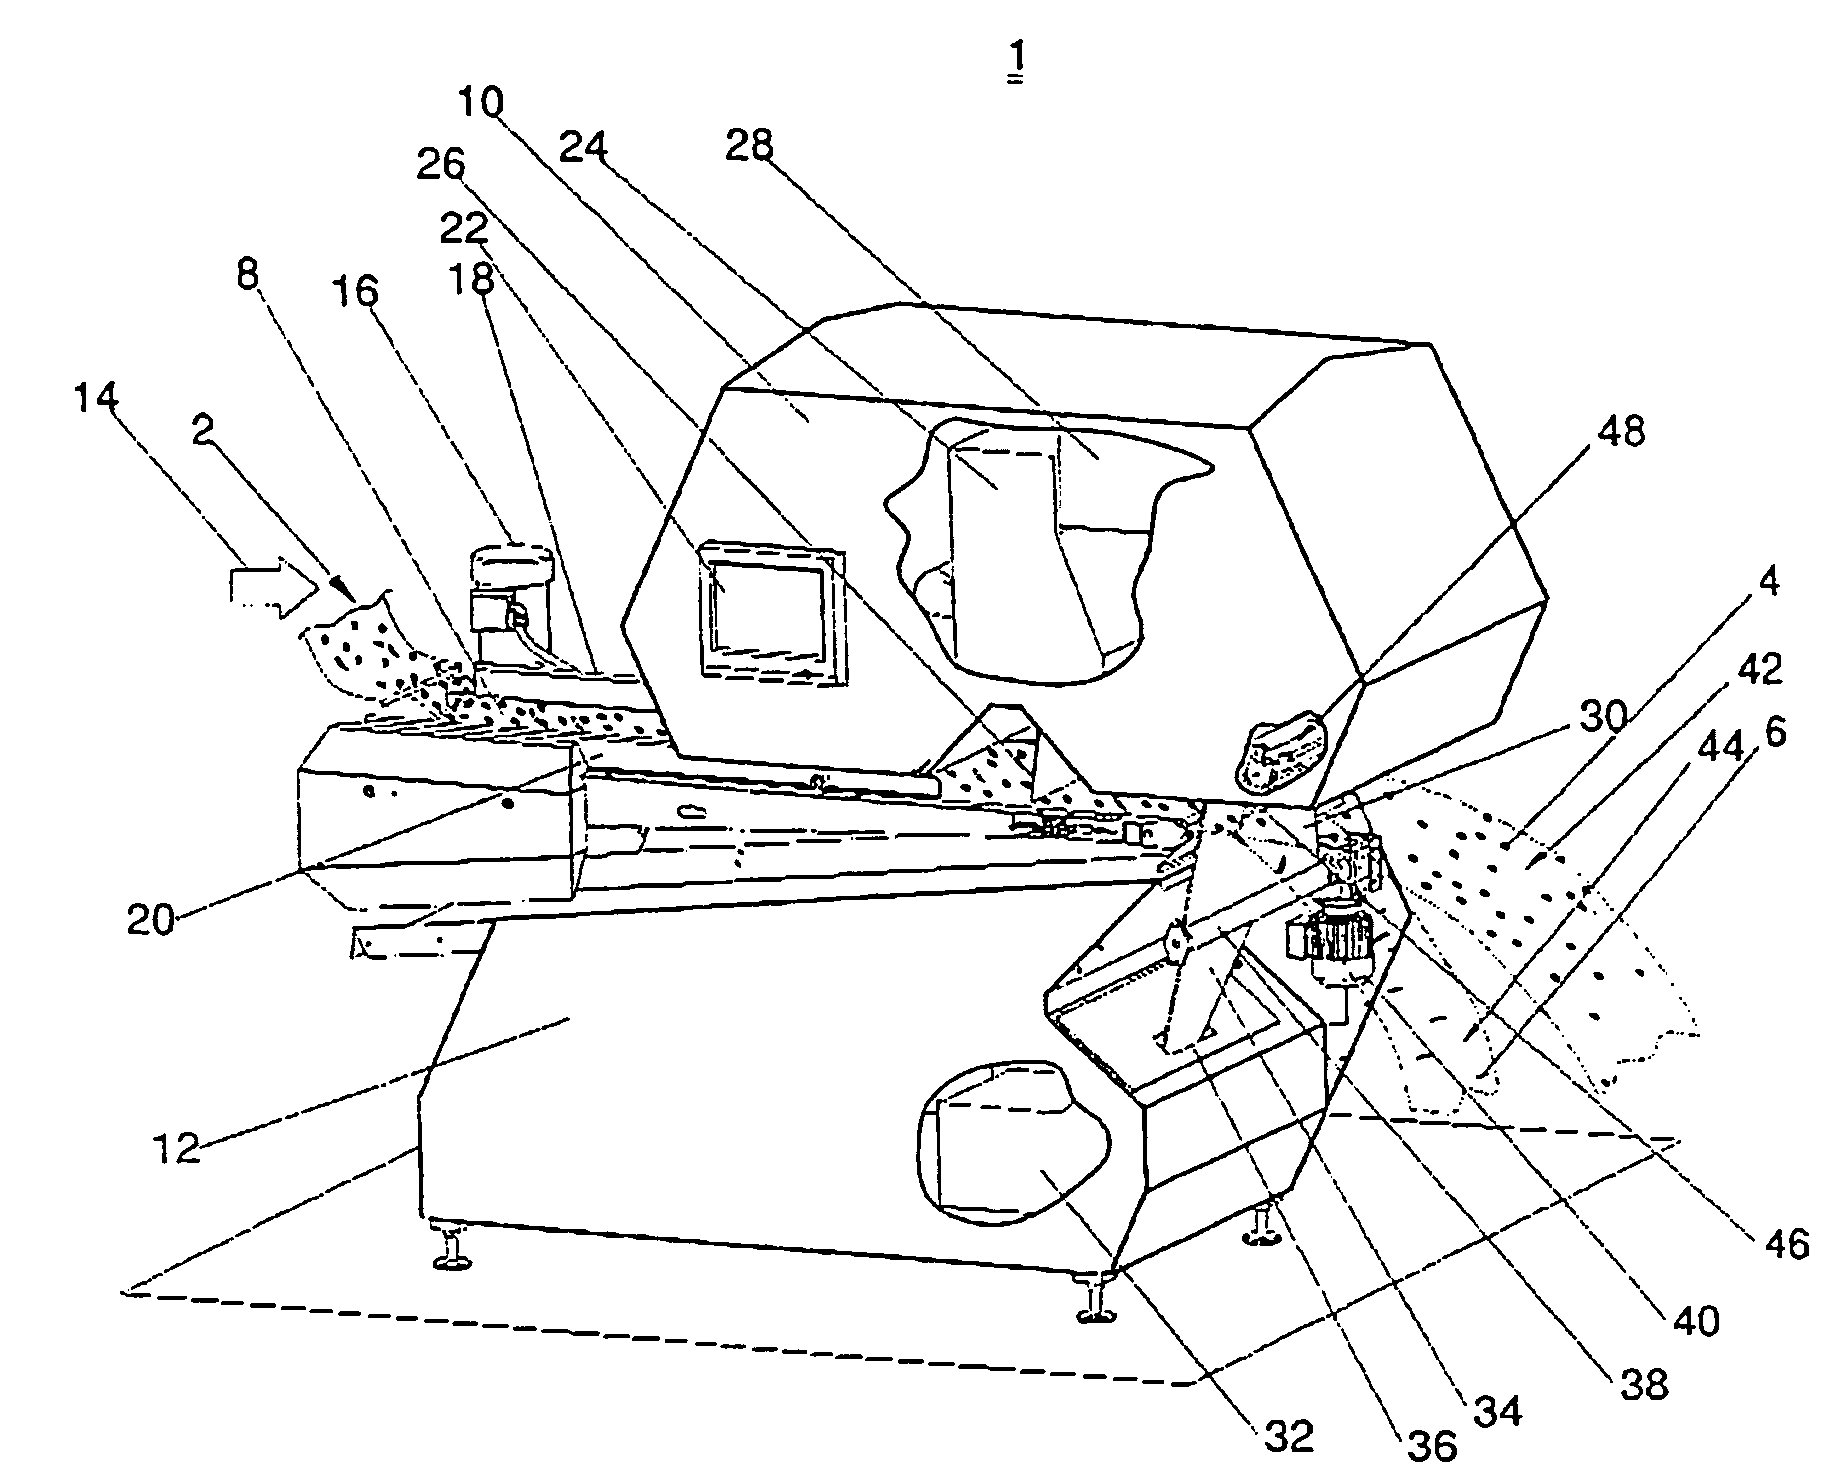 Apparatus and method for classifying and sorting articles